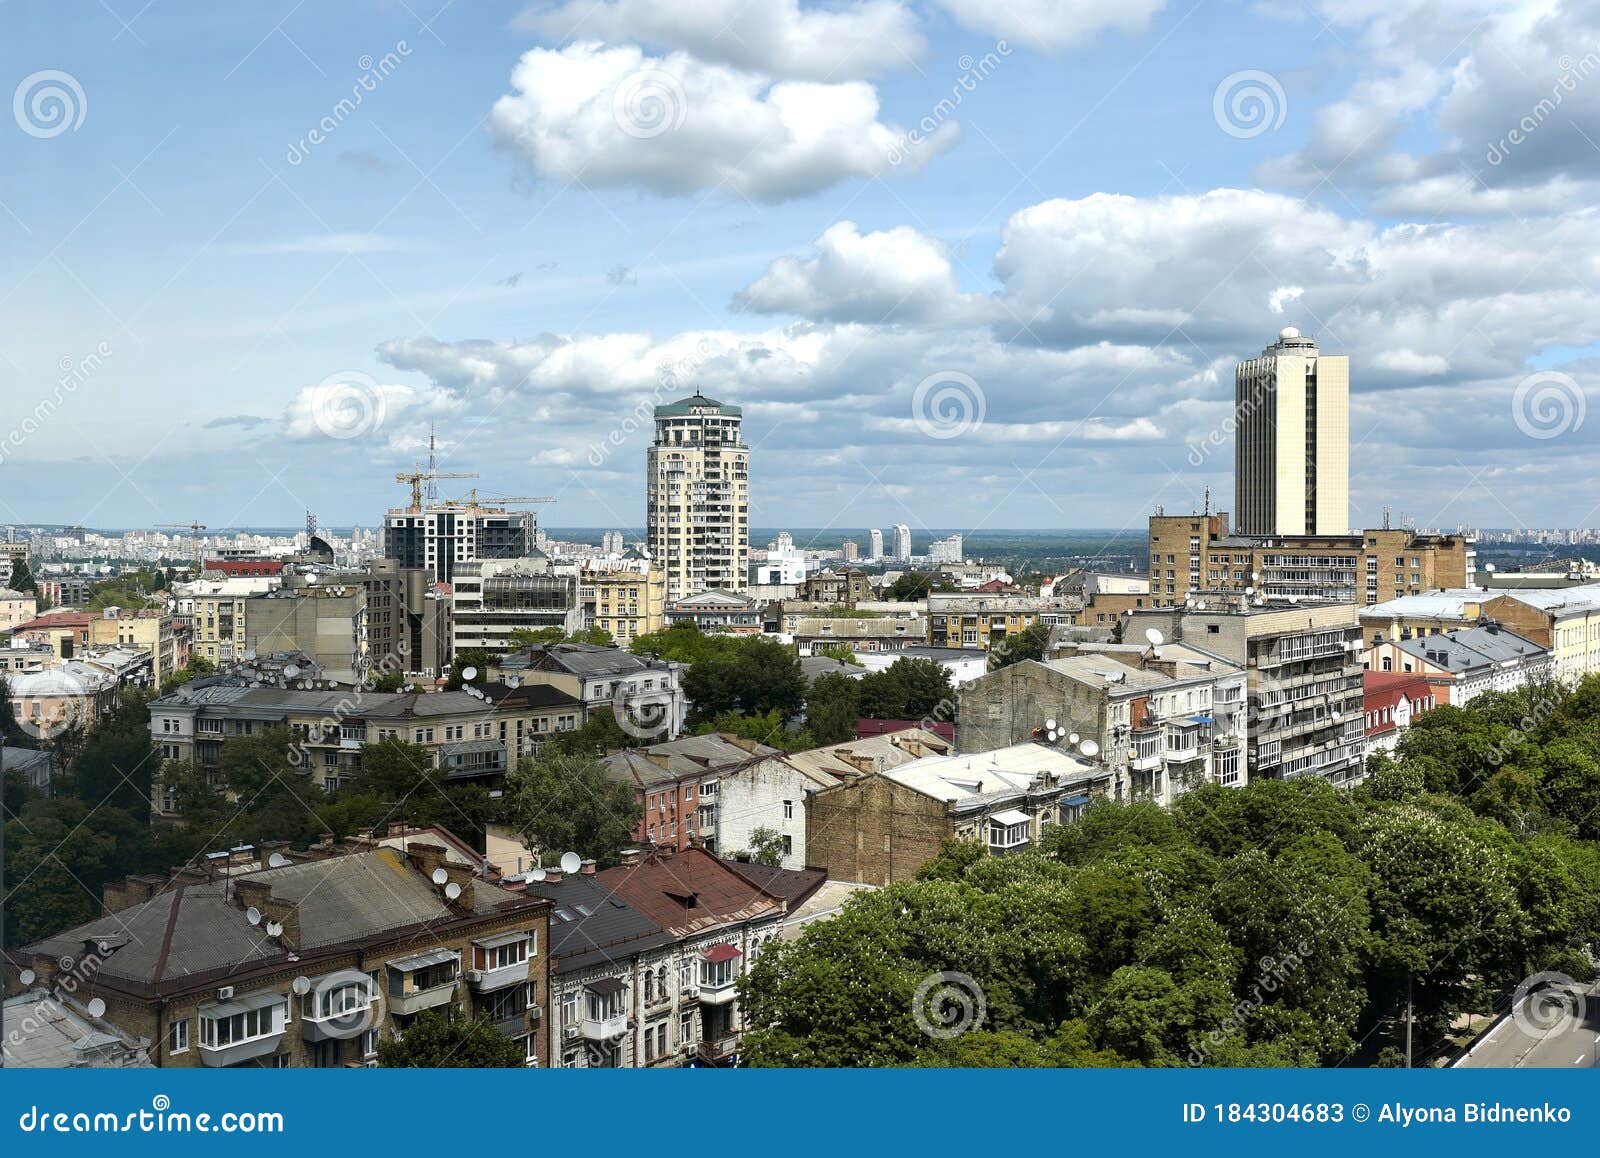 kiev, ukraine - 26 may 2020: panorama of kyiv city center, business cityscape of kiev, ukraine. old and modern architecture in